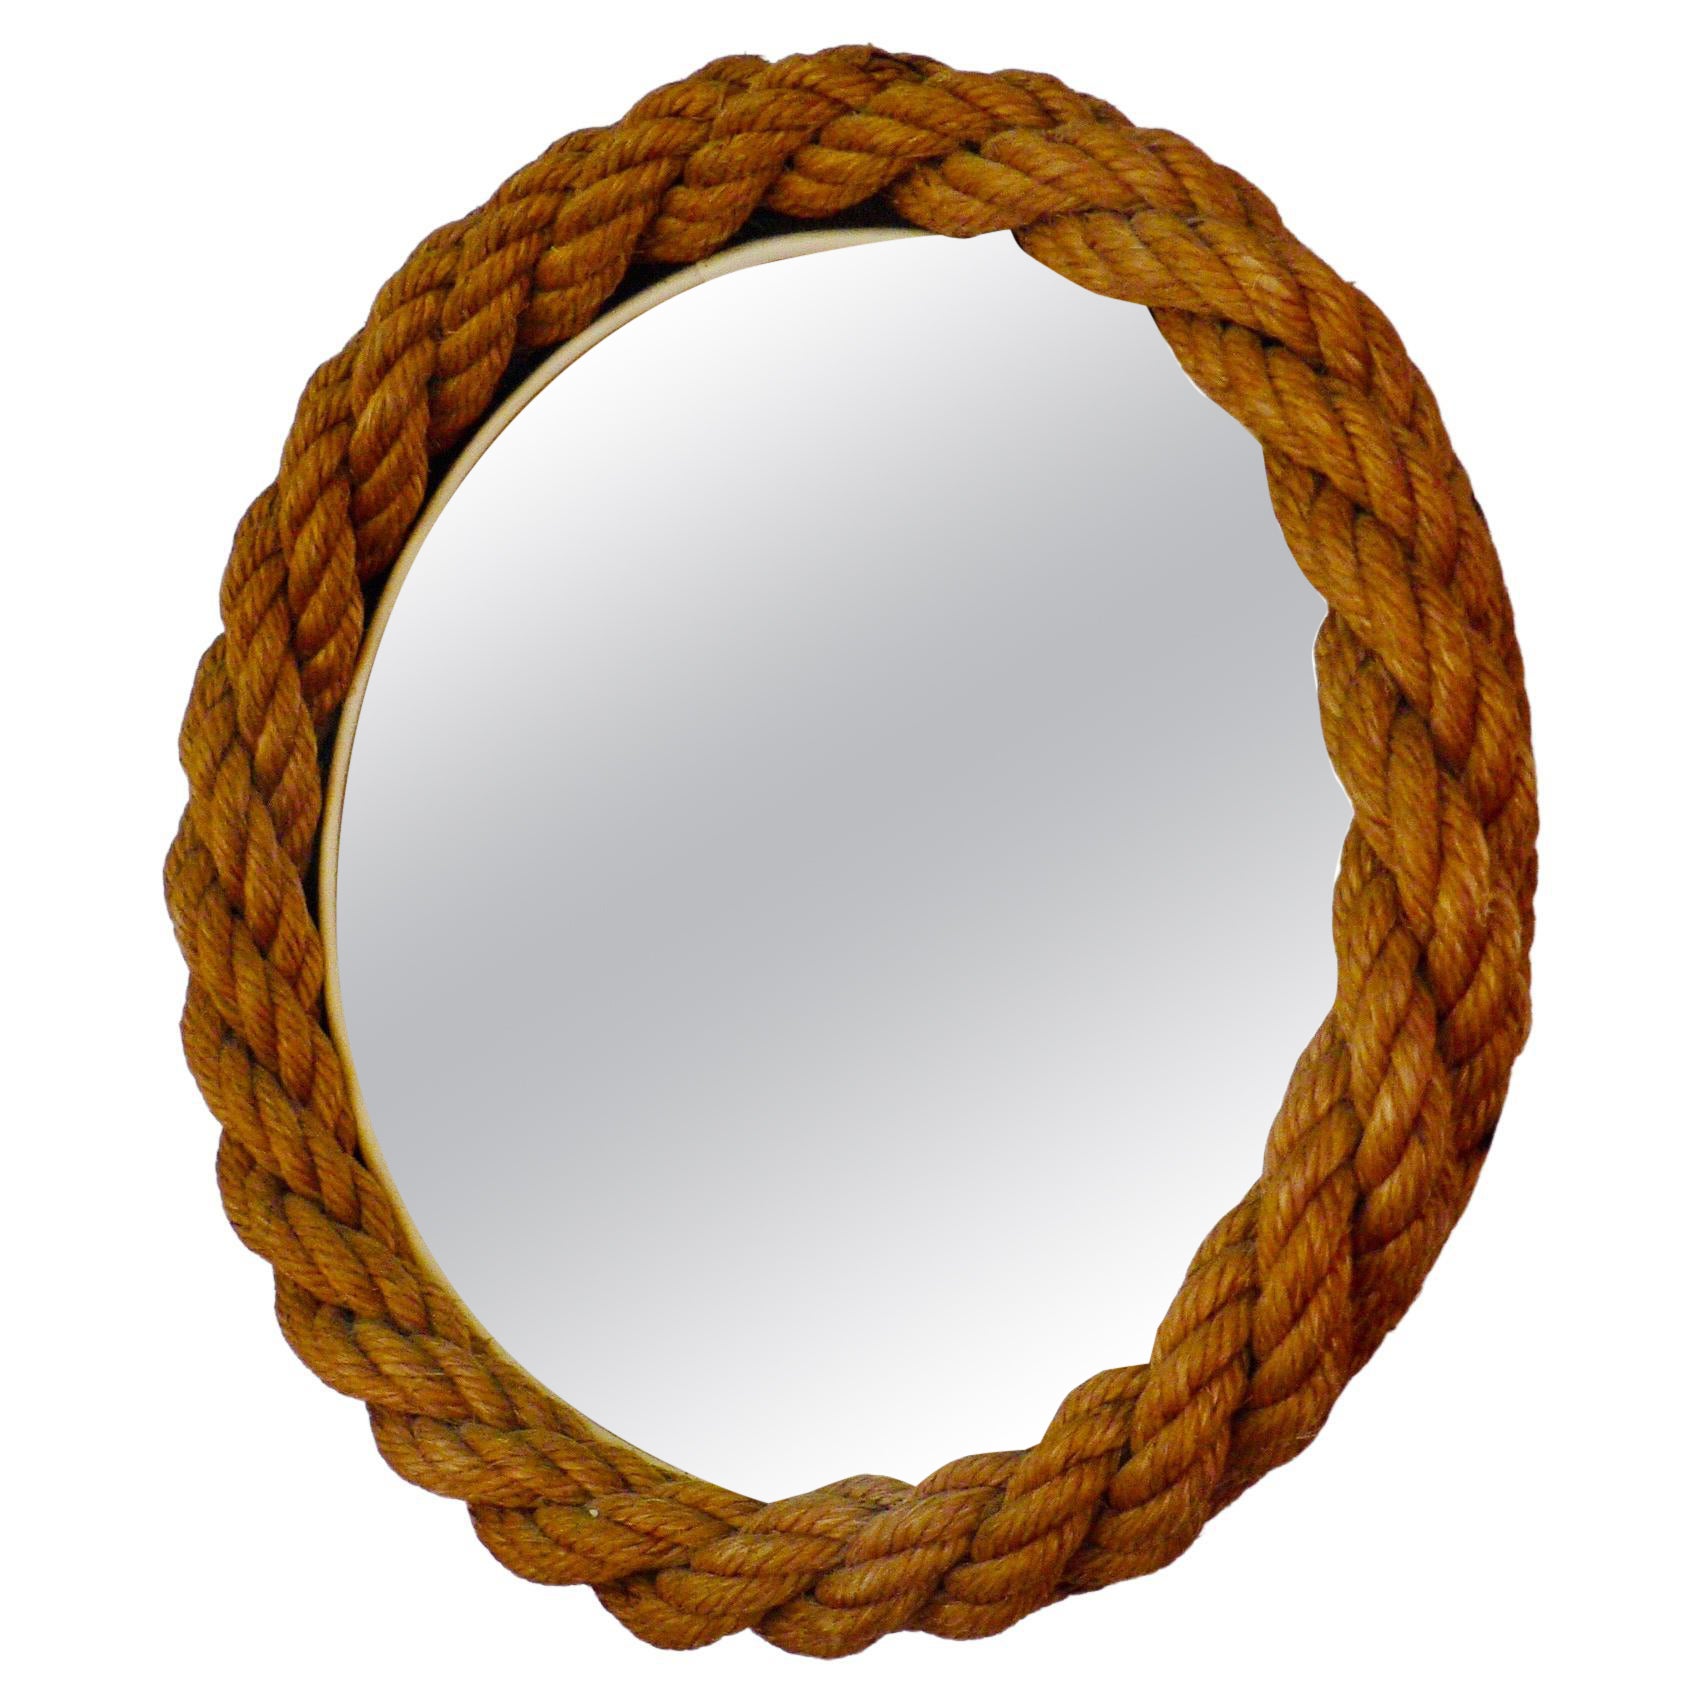 Audoux & Minnet french rope mirror For Sale